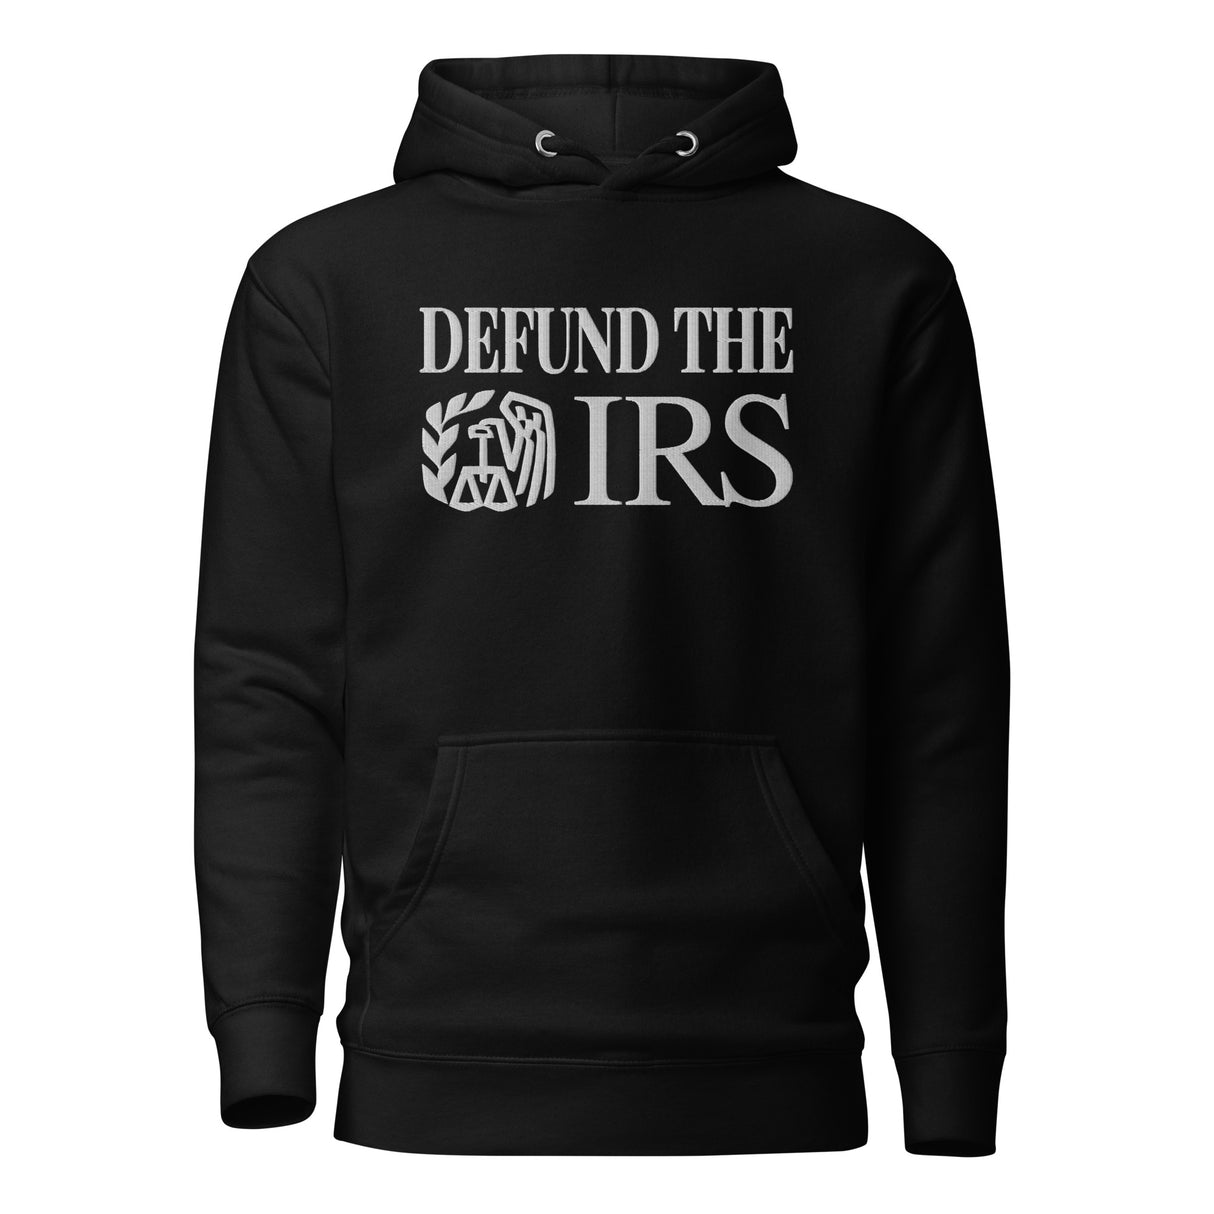 Defund The IRS Embroidered Hoodie